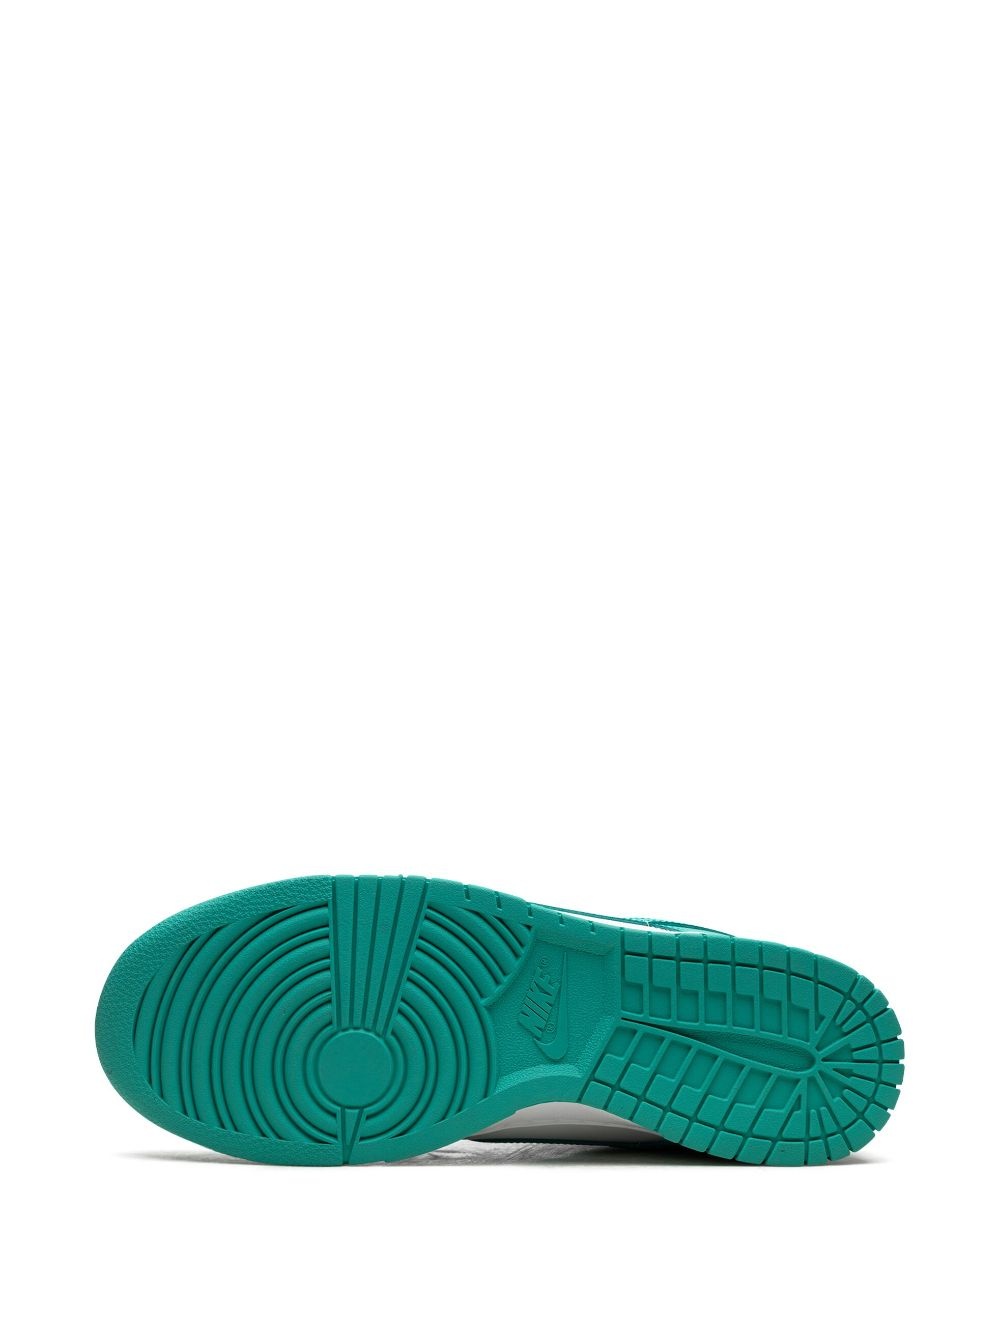 Dunk Low "Clear Jade" sneakers - 4